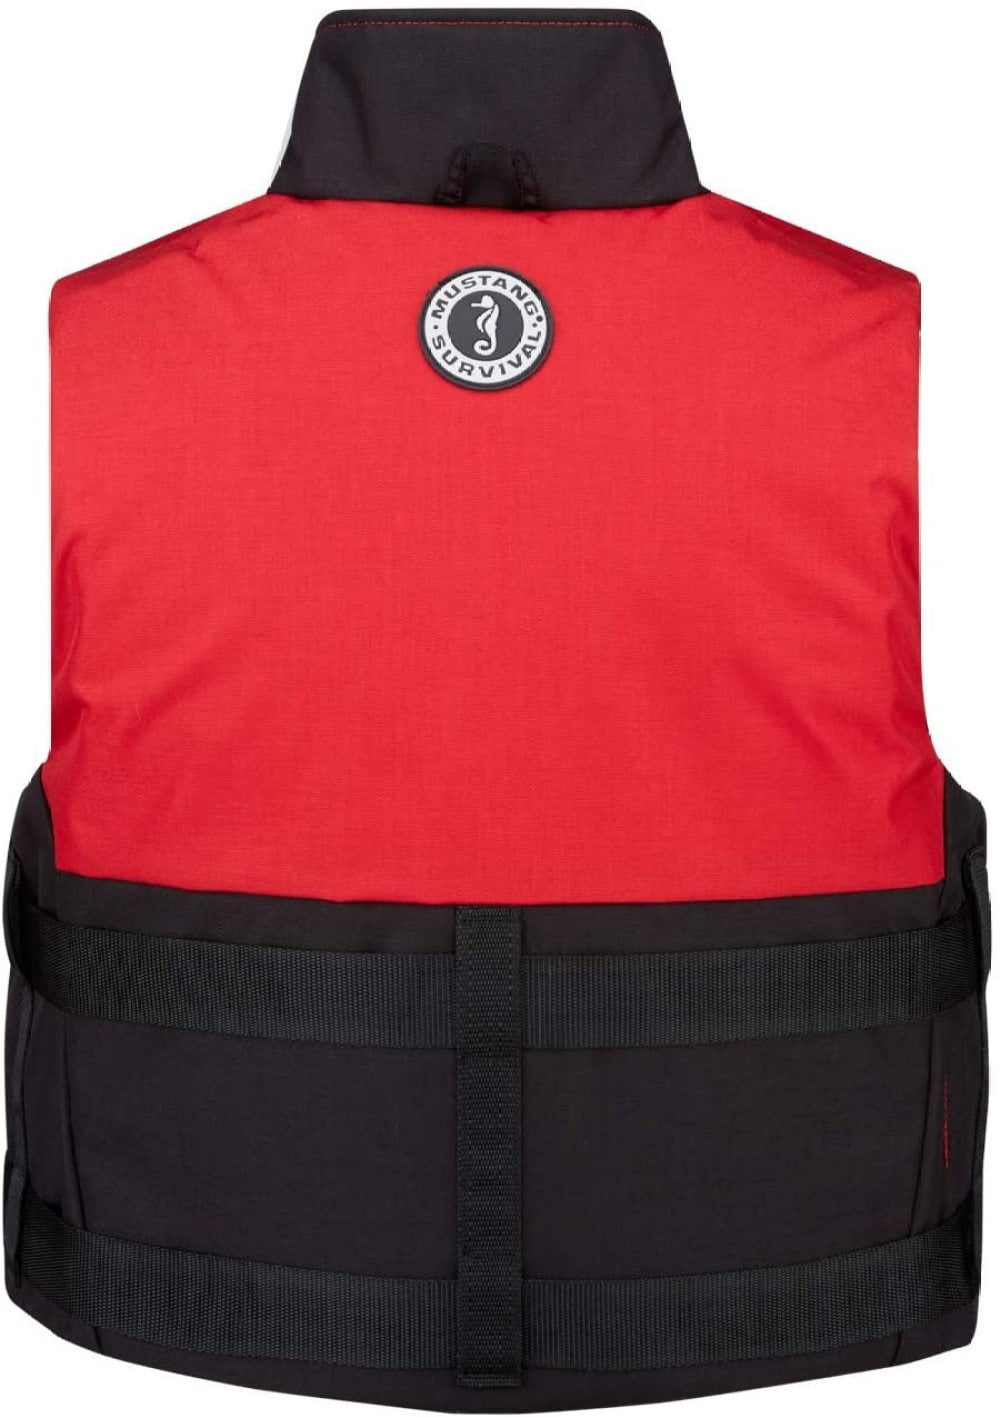 MUSTANG ACCEL 100 FISHING VEST XXL RED/BLACK 